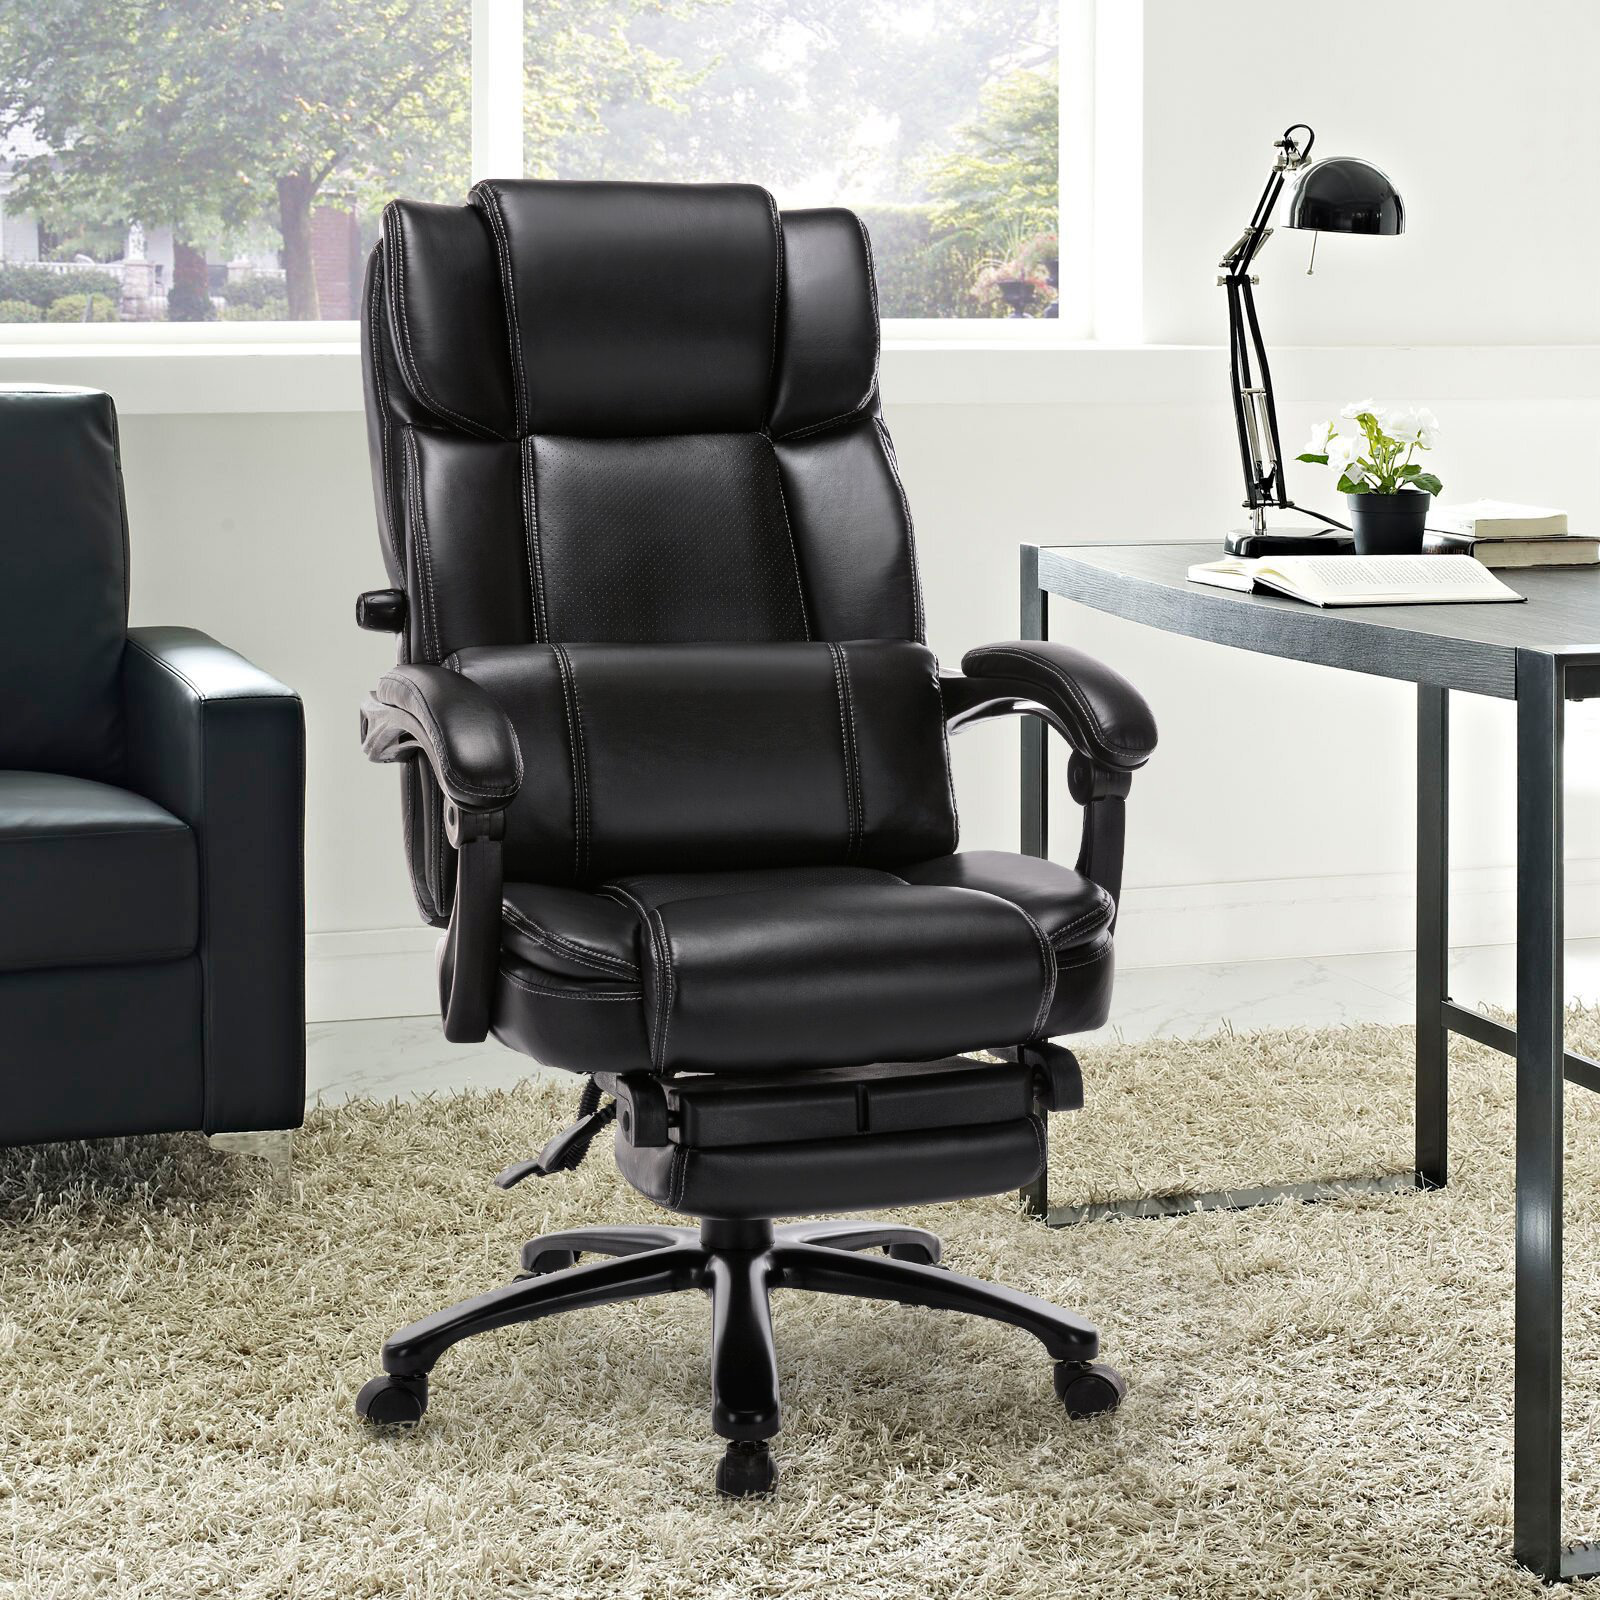 Chair office chair computer boss chair chair with footrest and massage 4 colors 